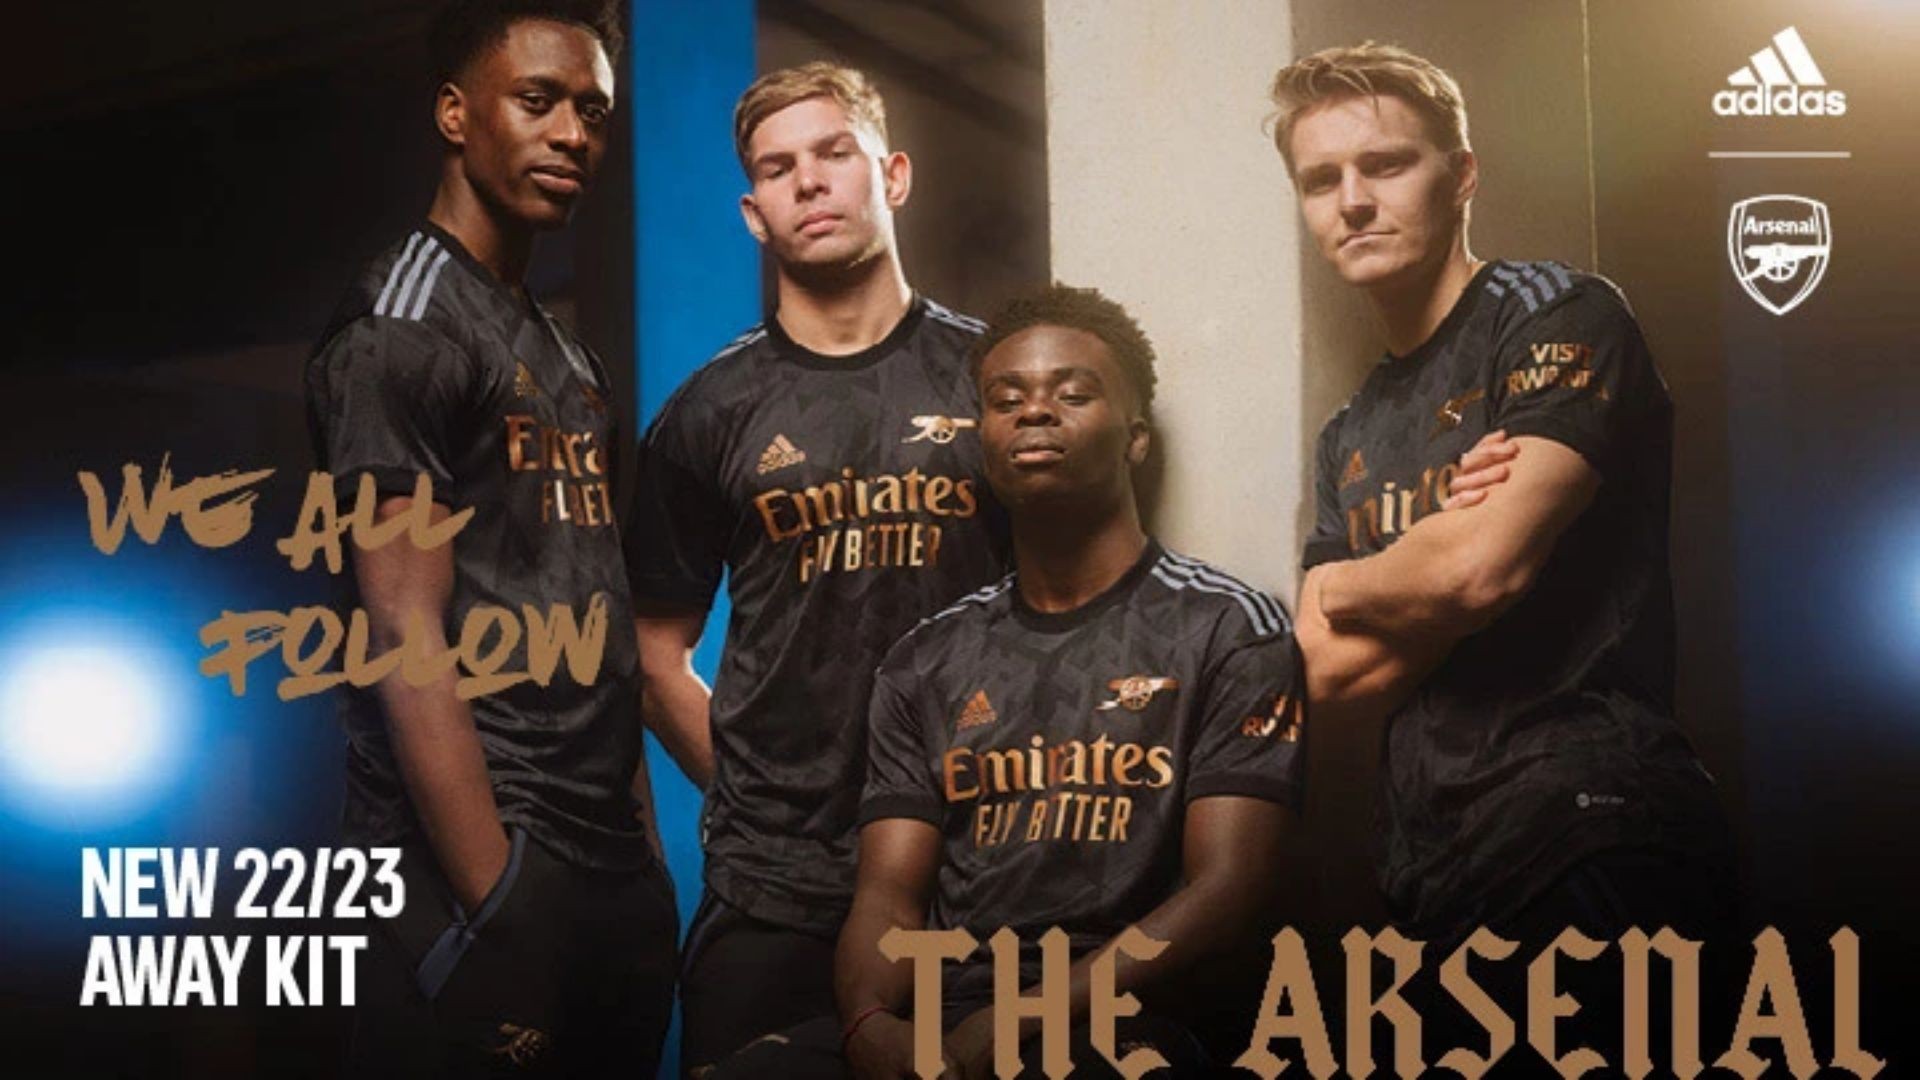 Where To Buy Arsenal X Adidas 2022 23 Away Kit? Price, Release Date, And More Explored